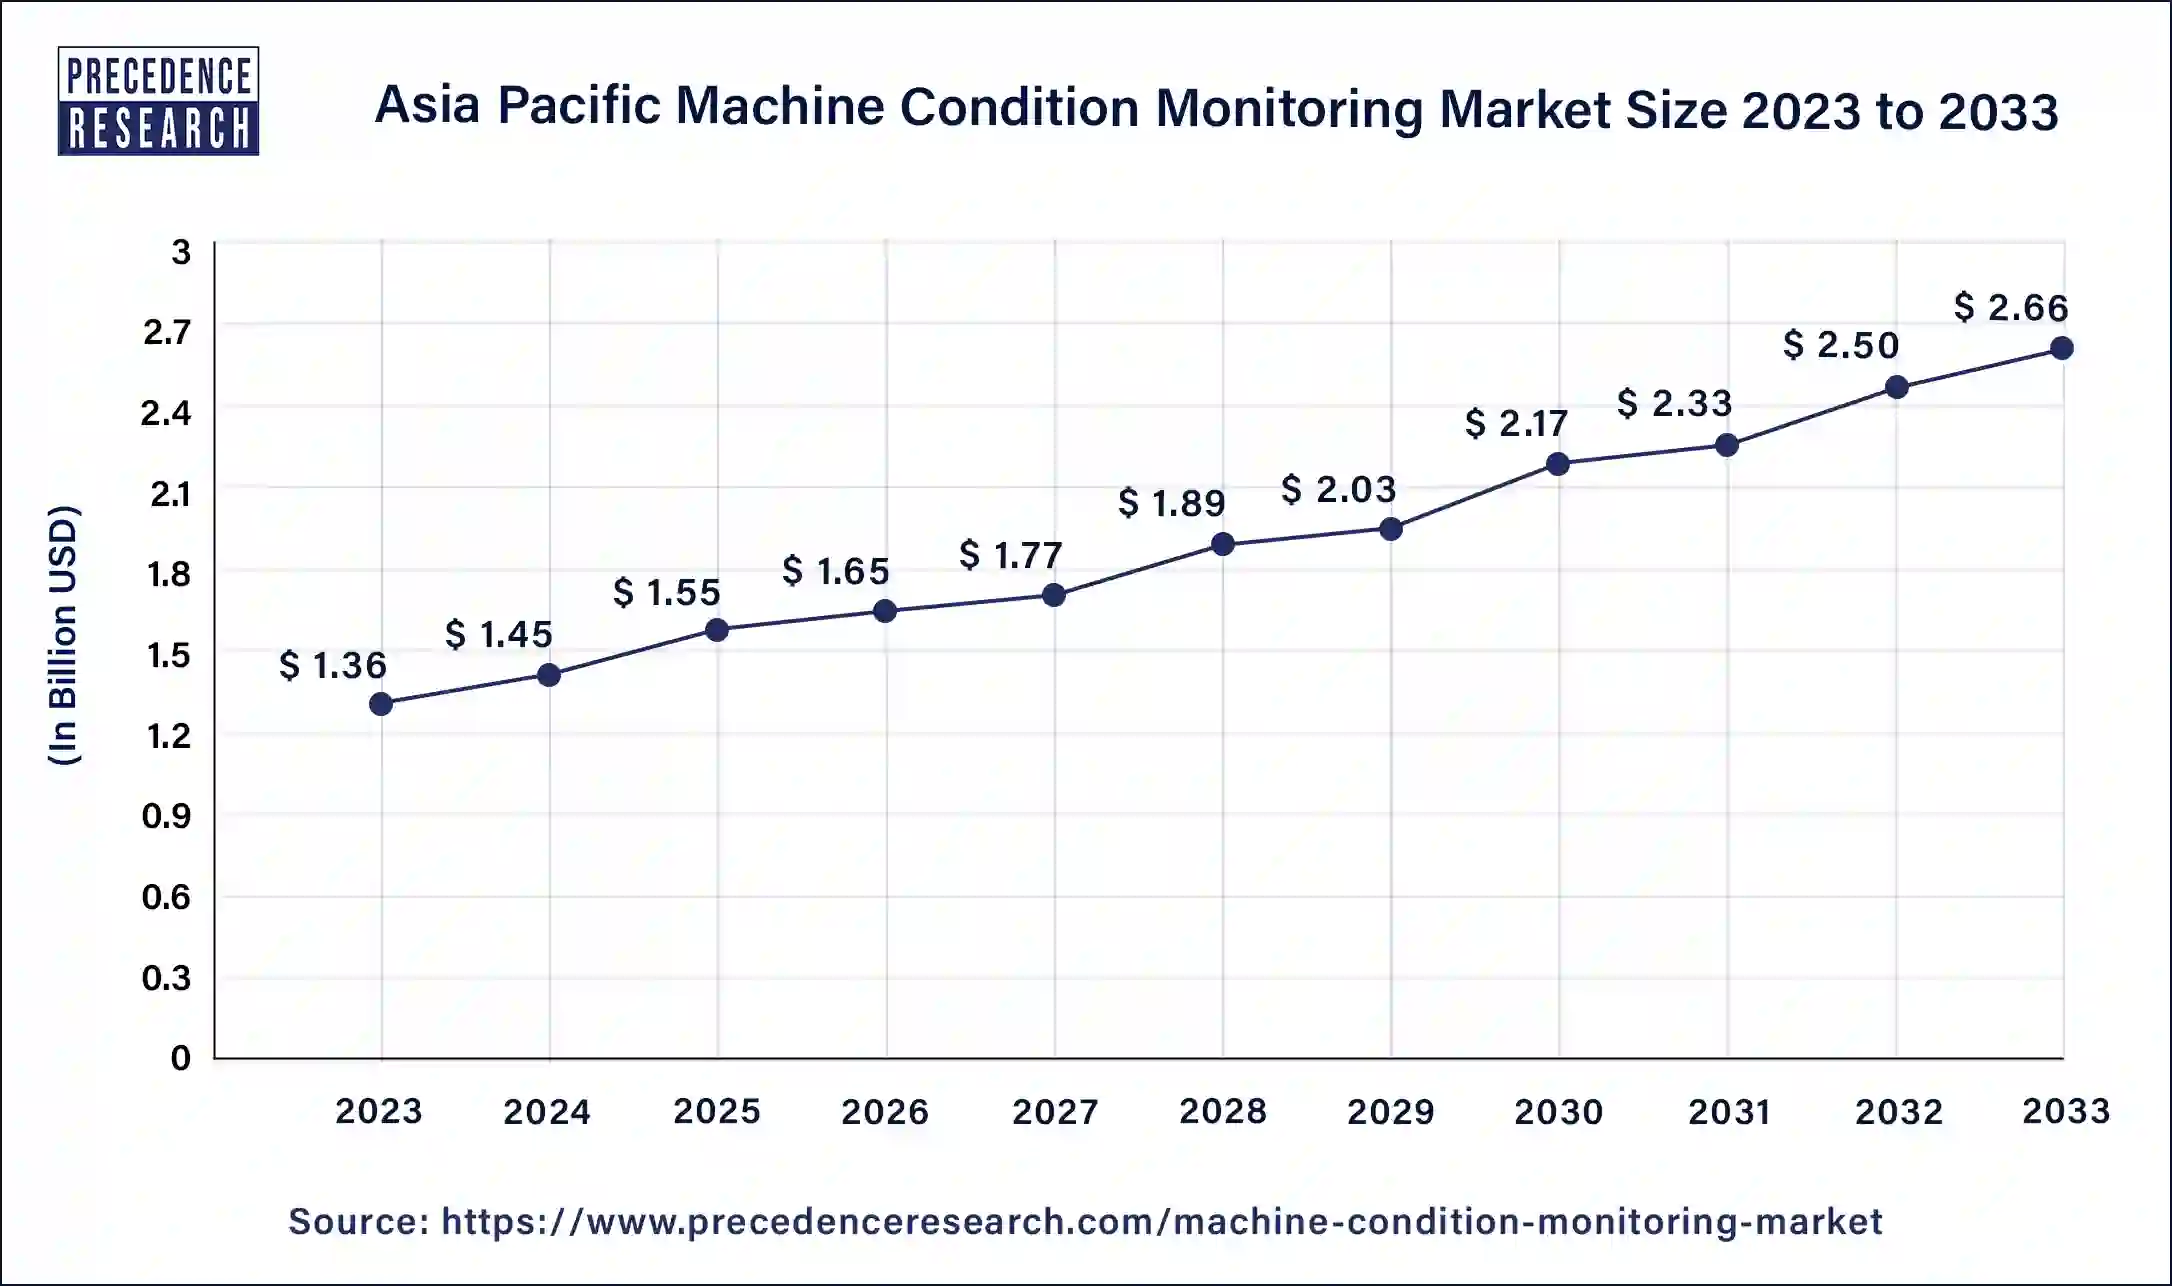 Asia Pacific Machine Condition Monitoring Market Size 2024 to 2033